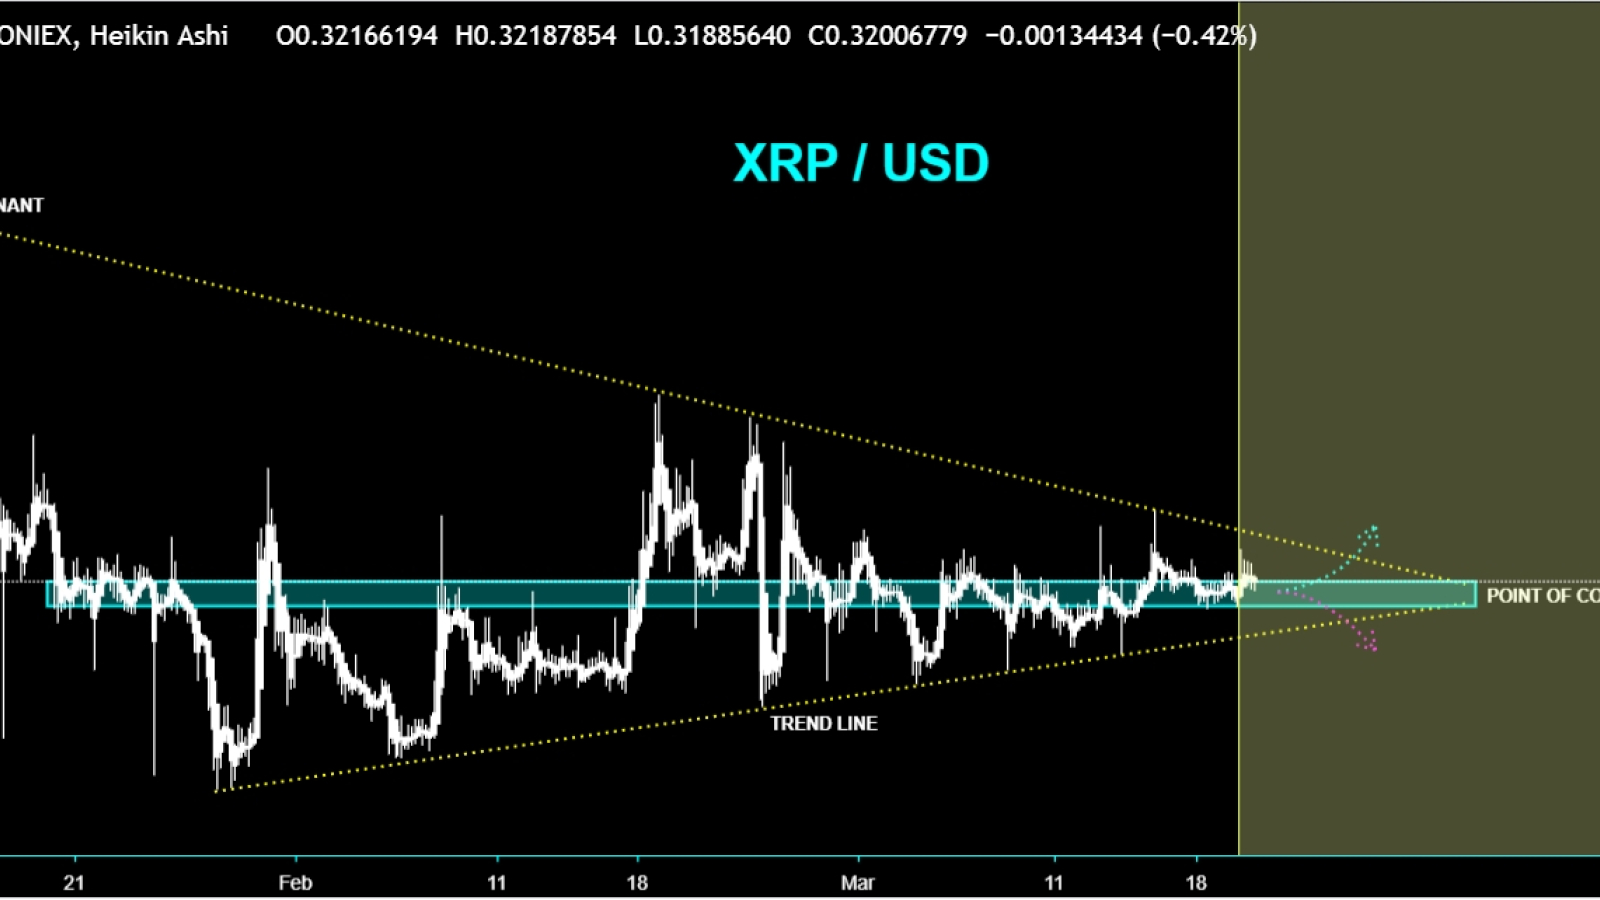 Watch XRP patterns closely